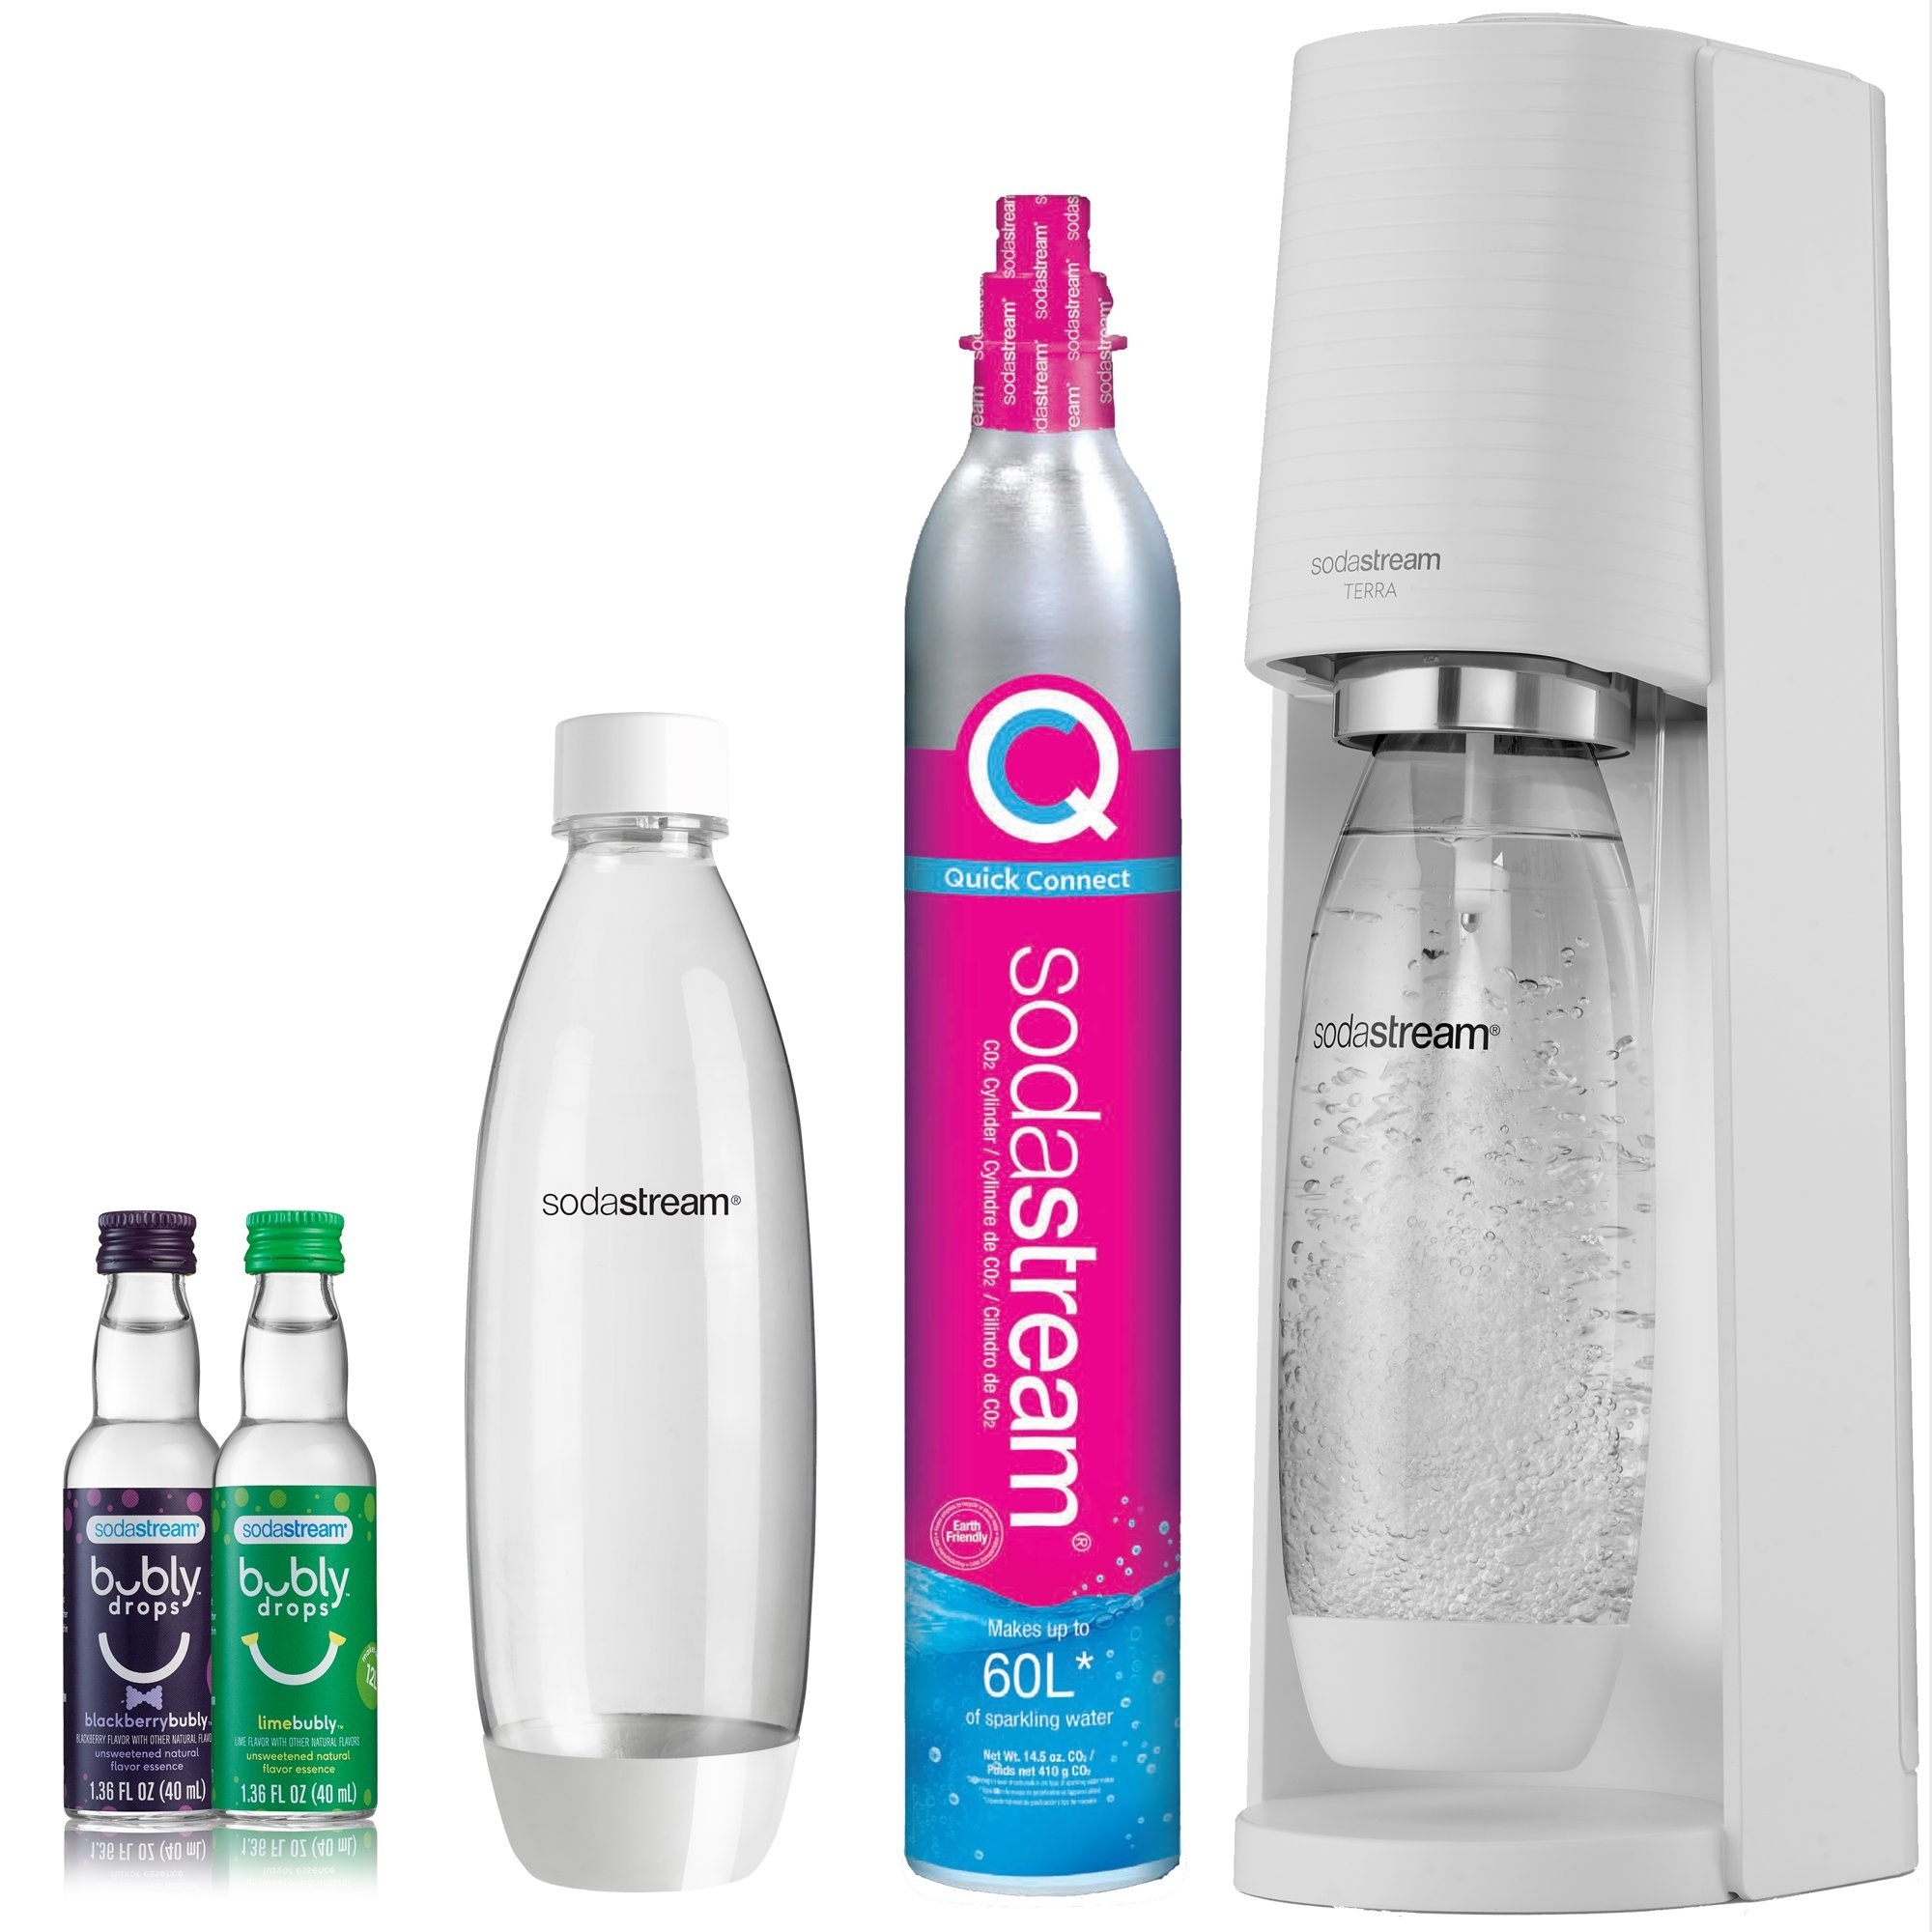 Product shot of a SodaStream with two bottles, a canister of CO2, and two small bottles of flavored liquid